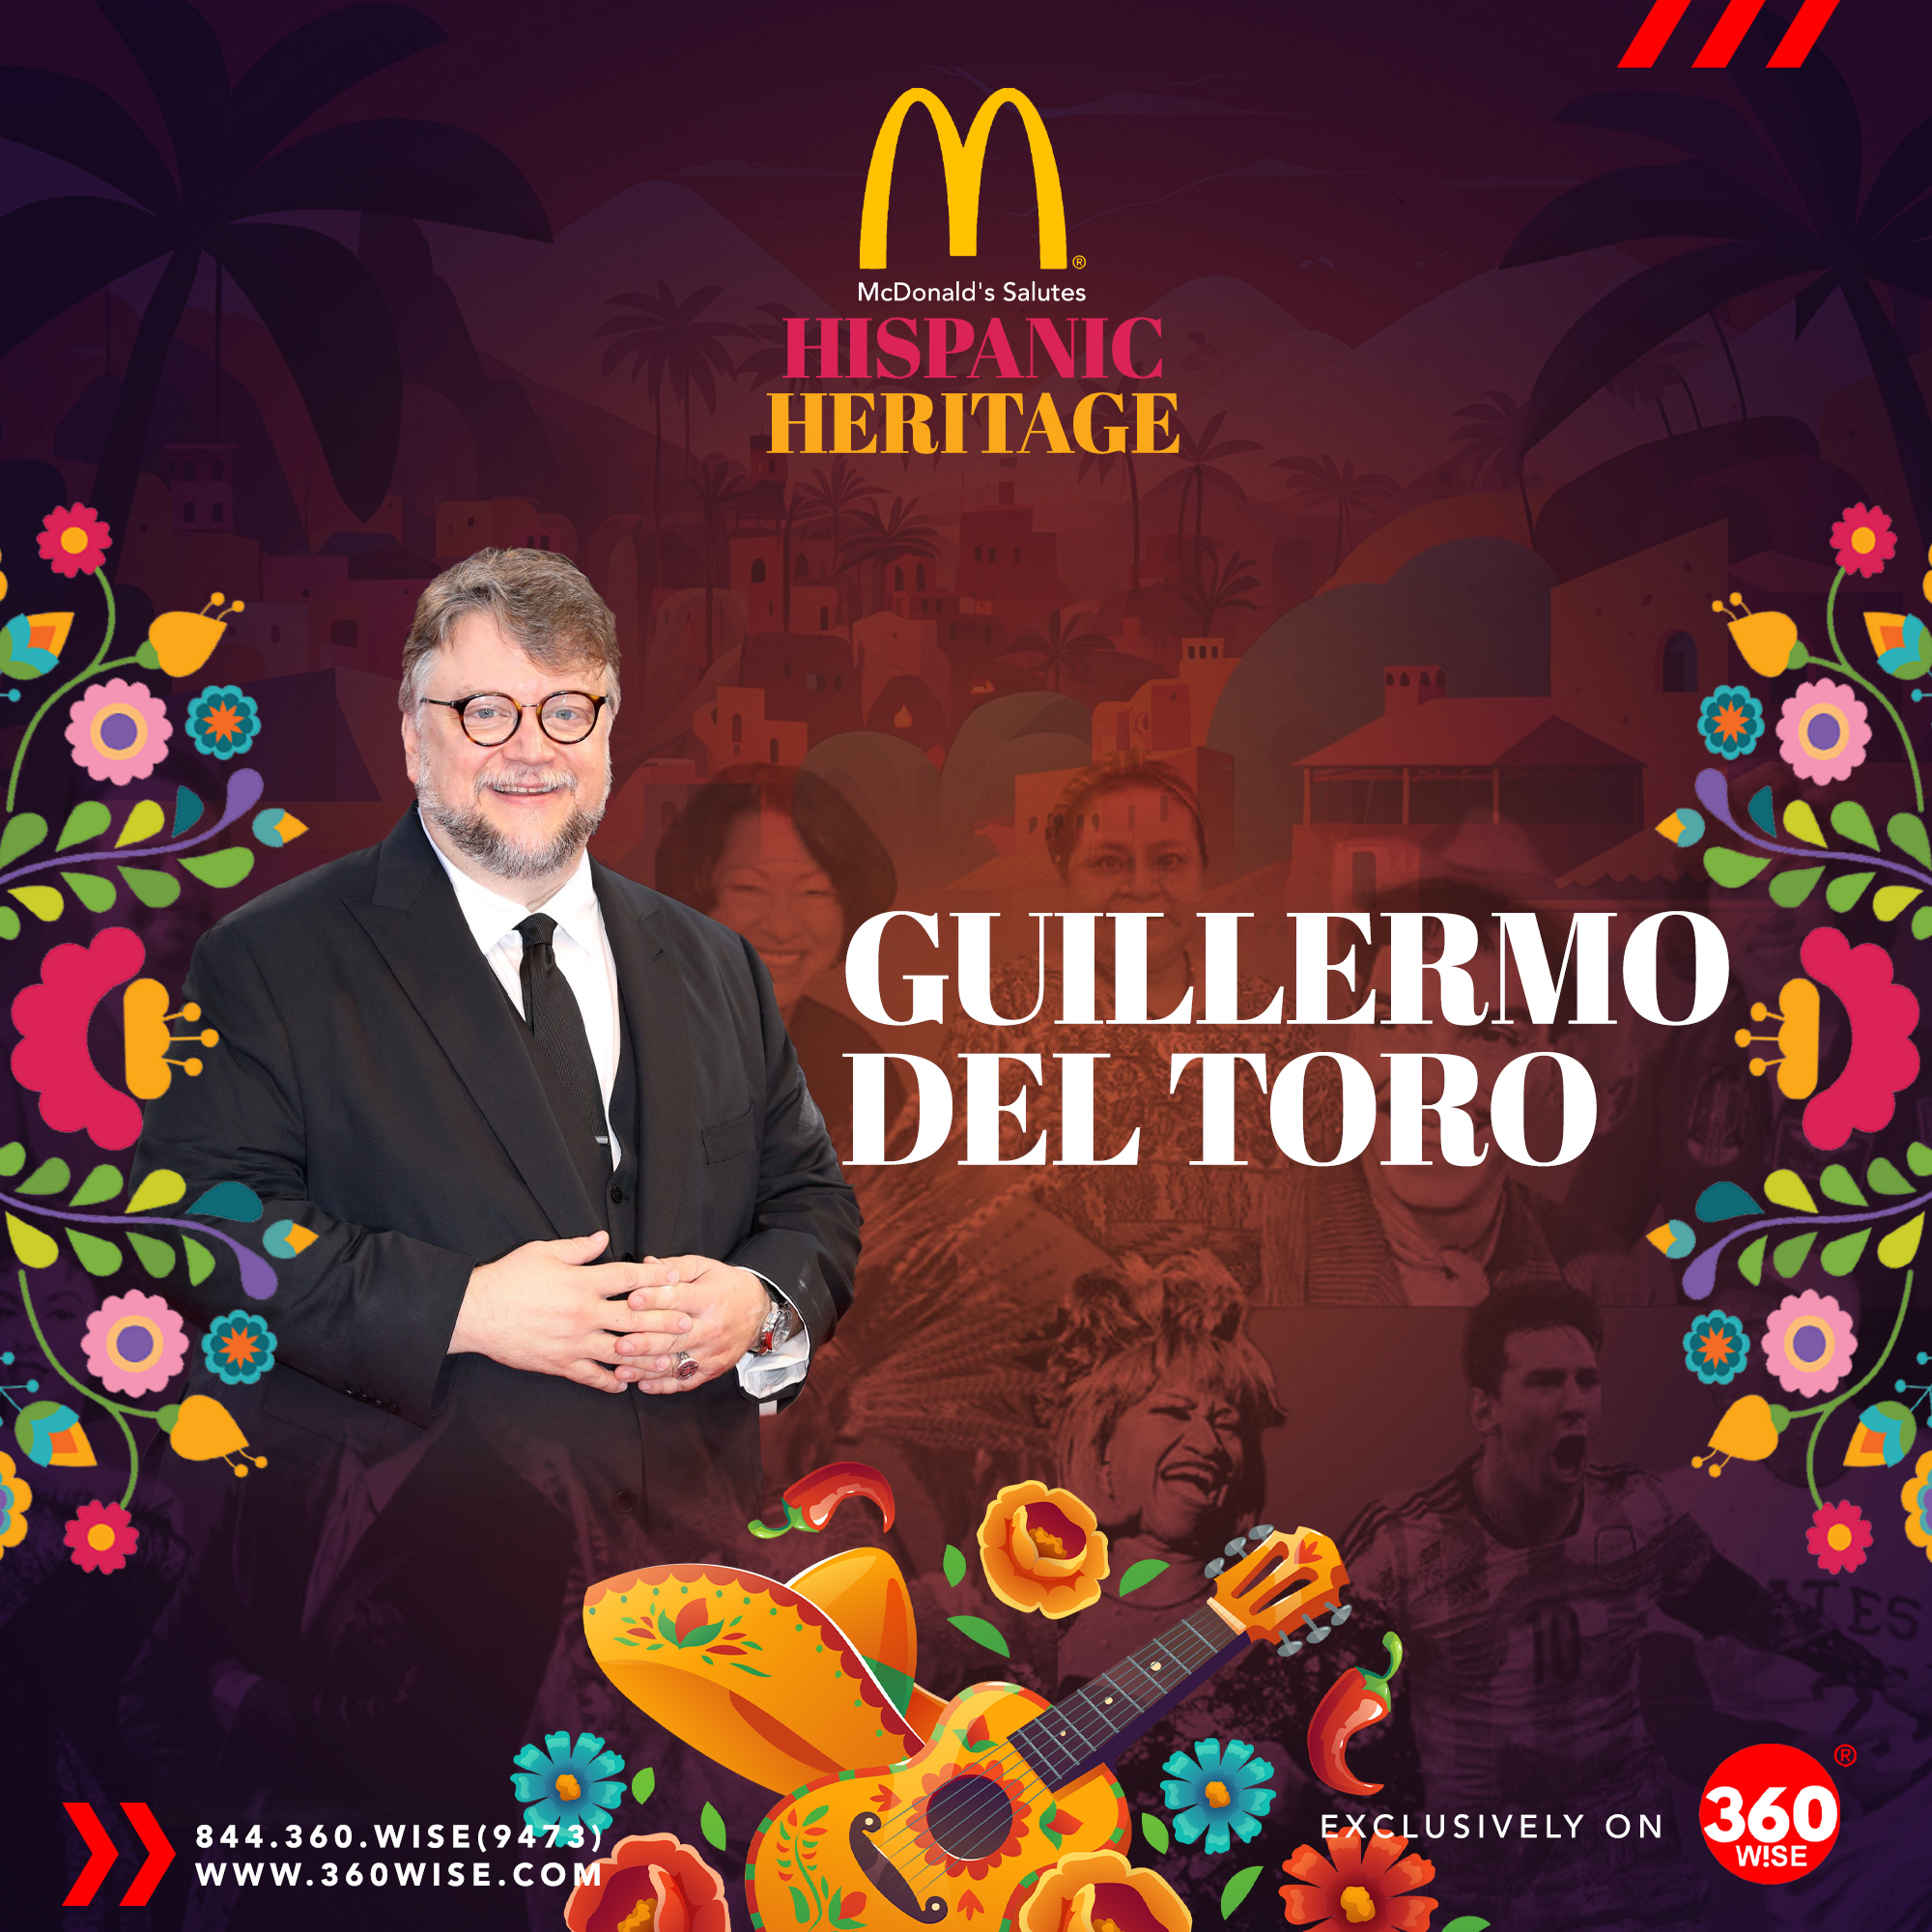 McDonald's Hispanic Heritage Month Salutes - Guillermo Del Toro - Powered By 360WiSE